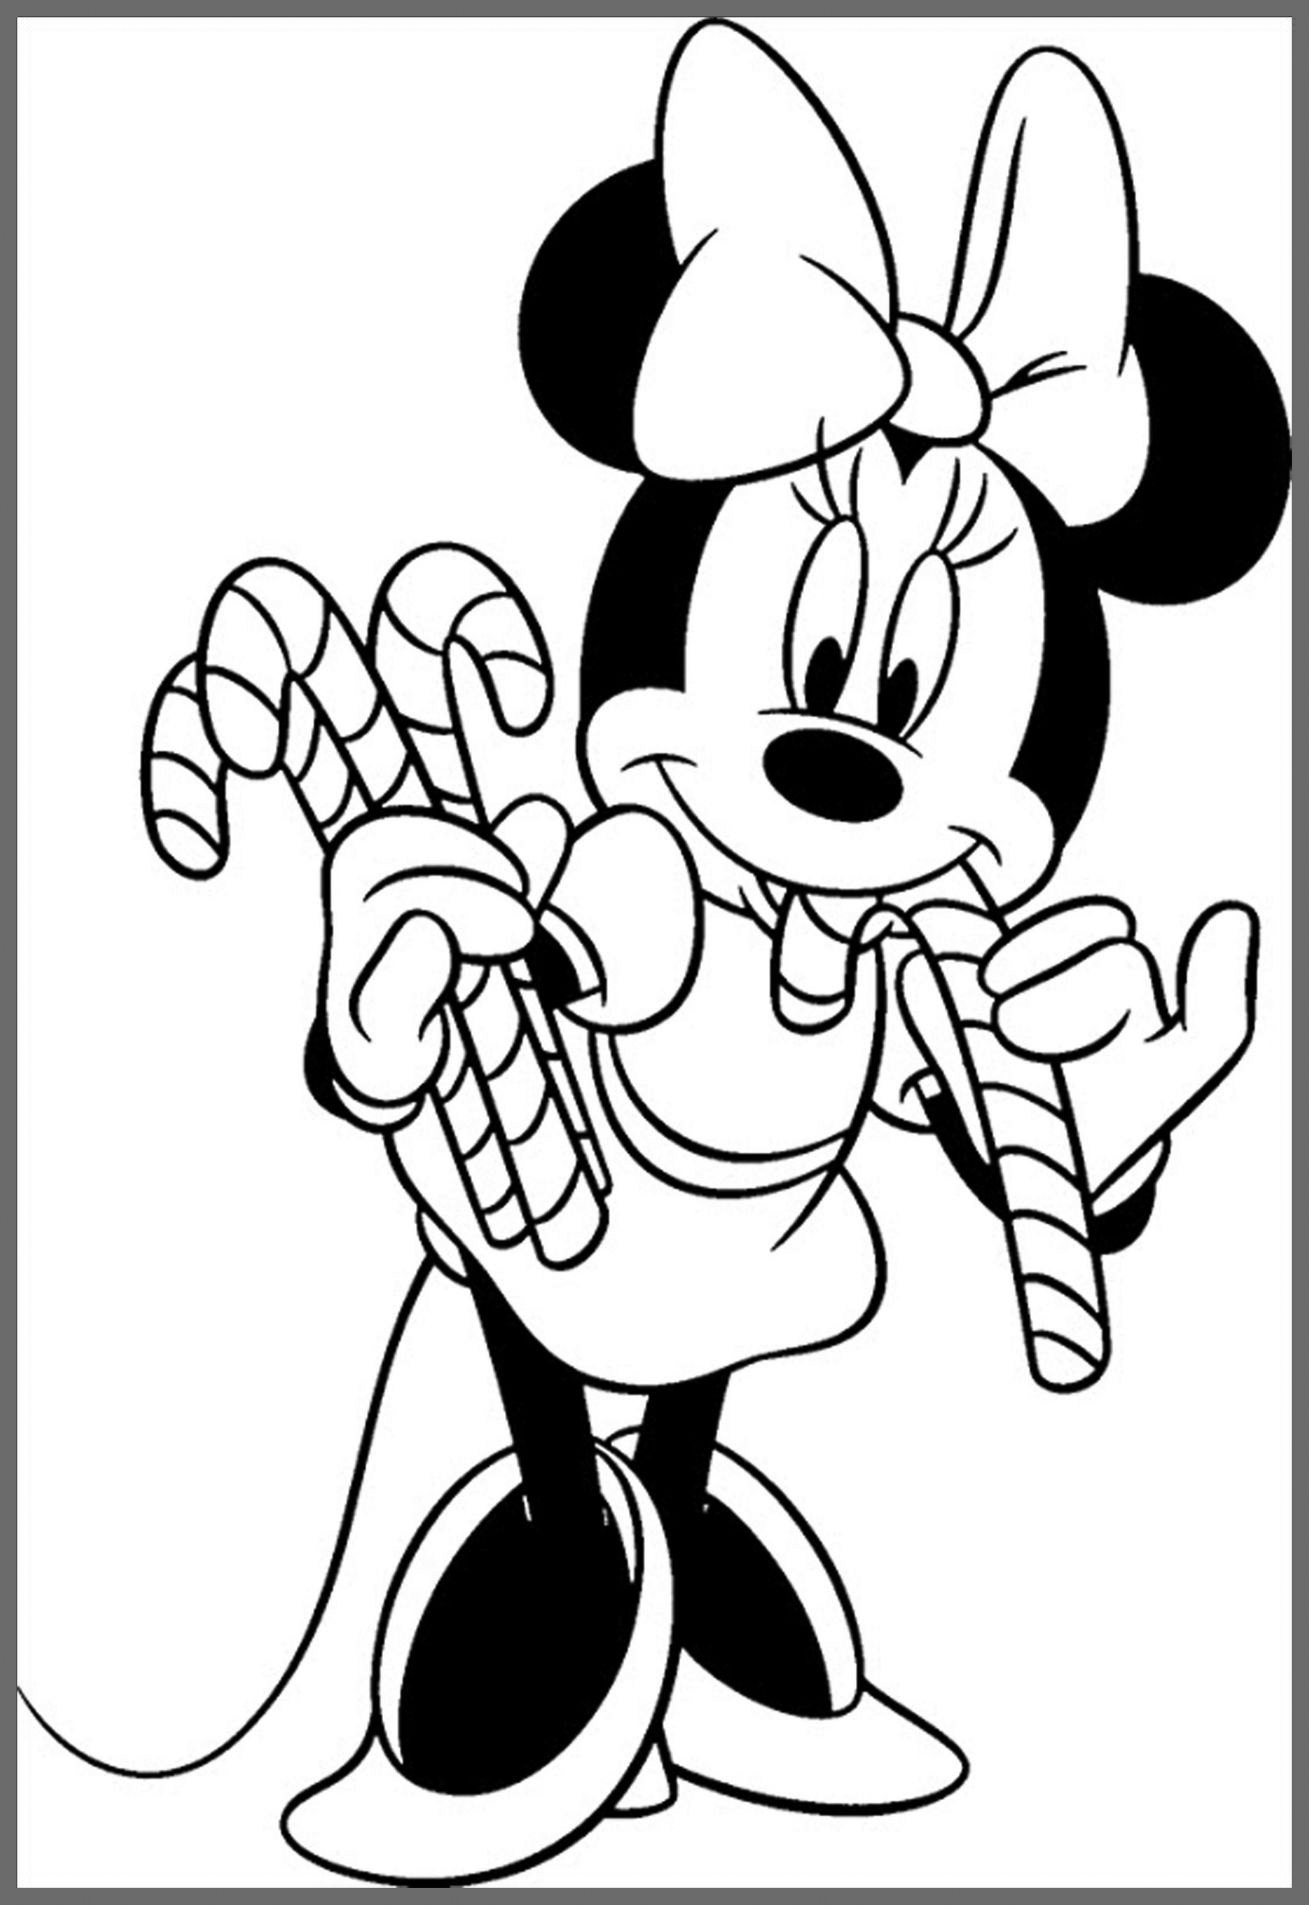 Download Mickey Mouse Christmas Coloring Pages Best Coloring Pages For Kids